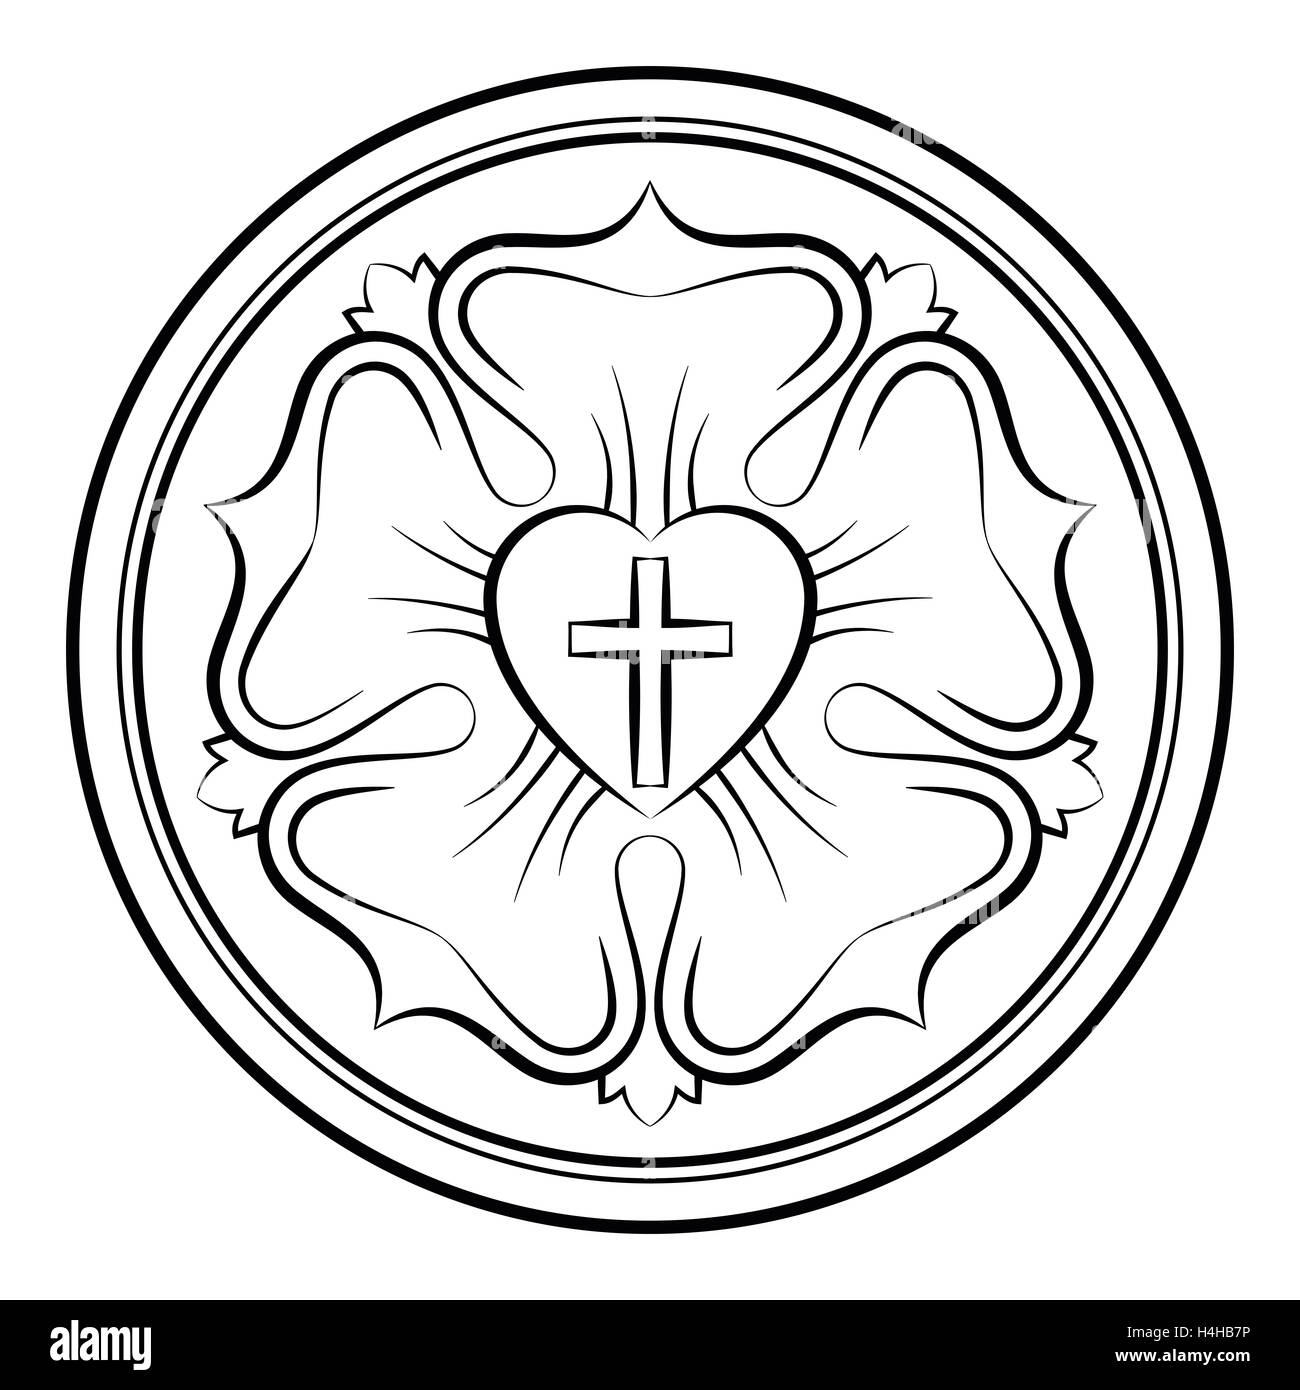 Luther rose monochrome calligraphic illustration. Also Luther seal, symbol of Lutheranism. Stock Photo